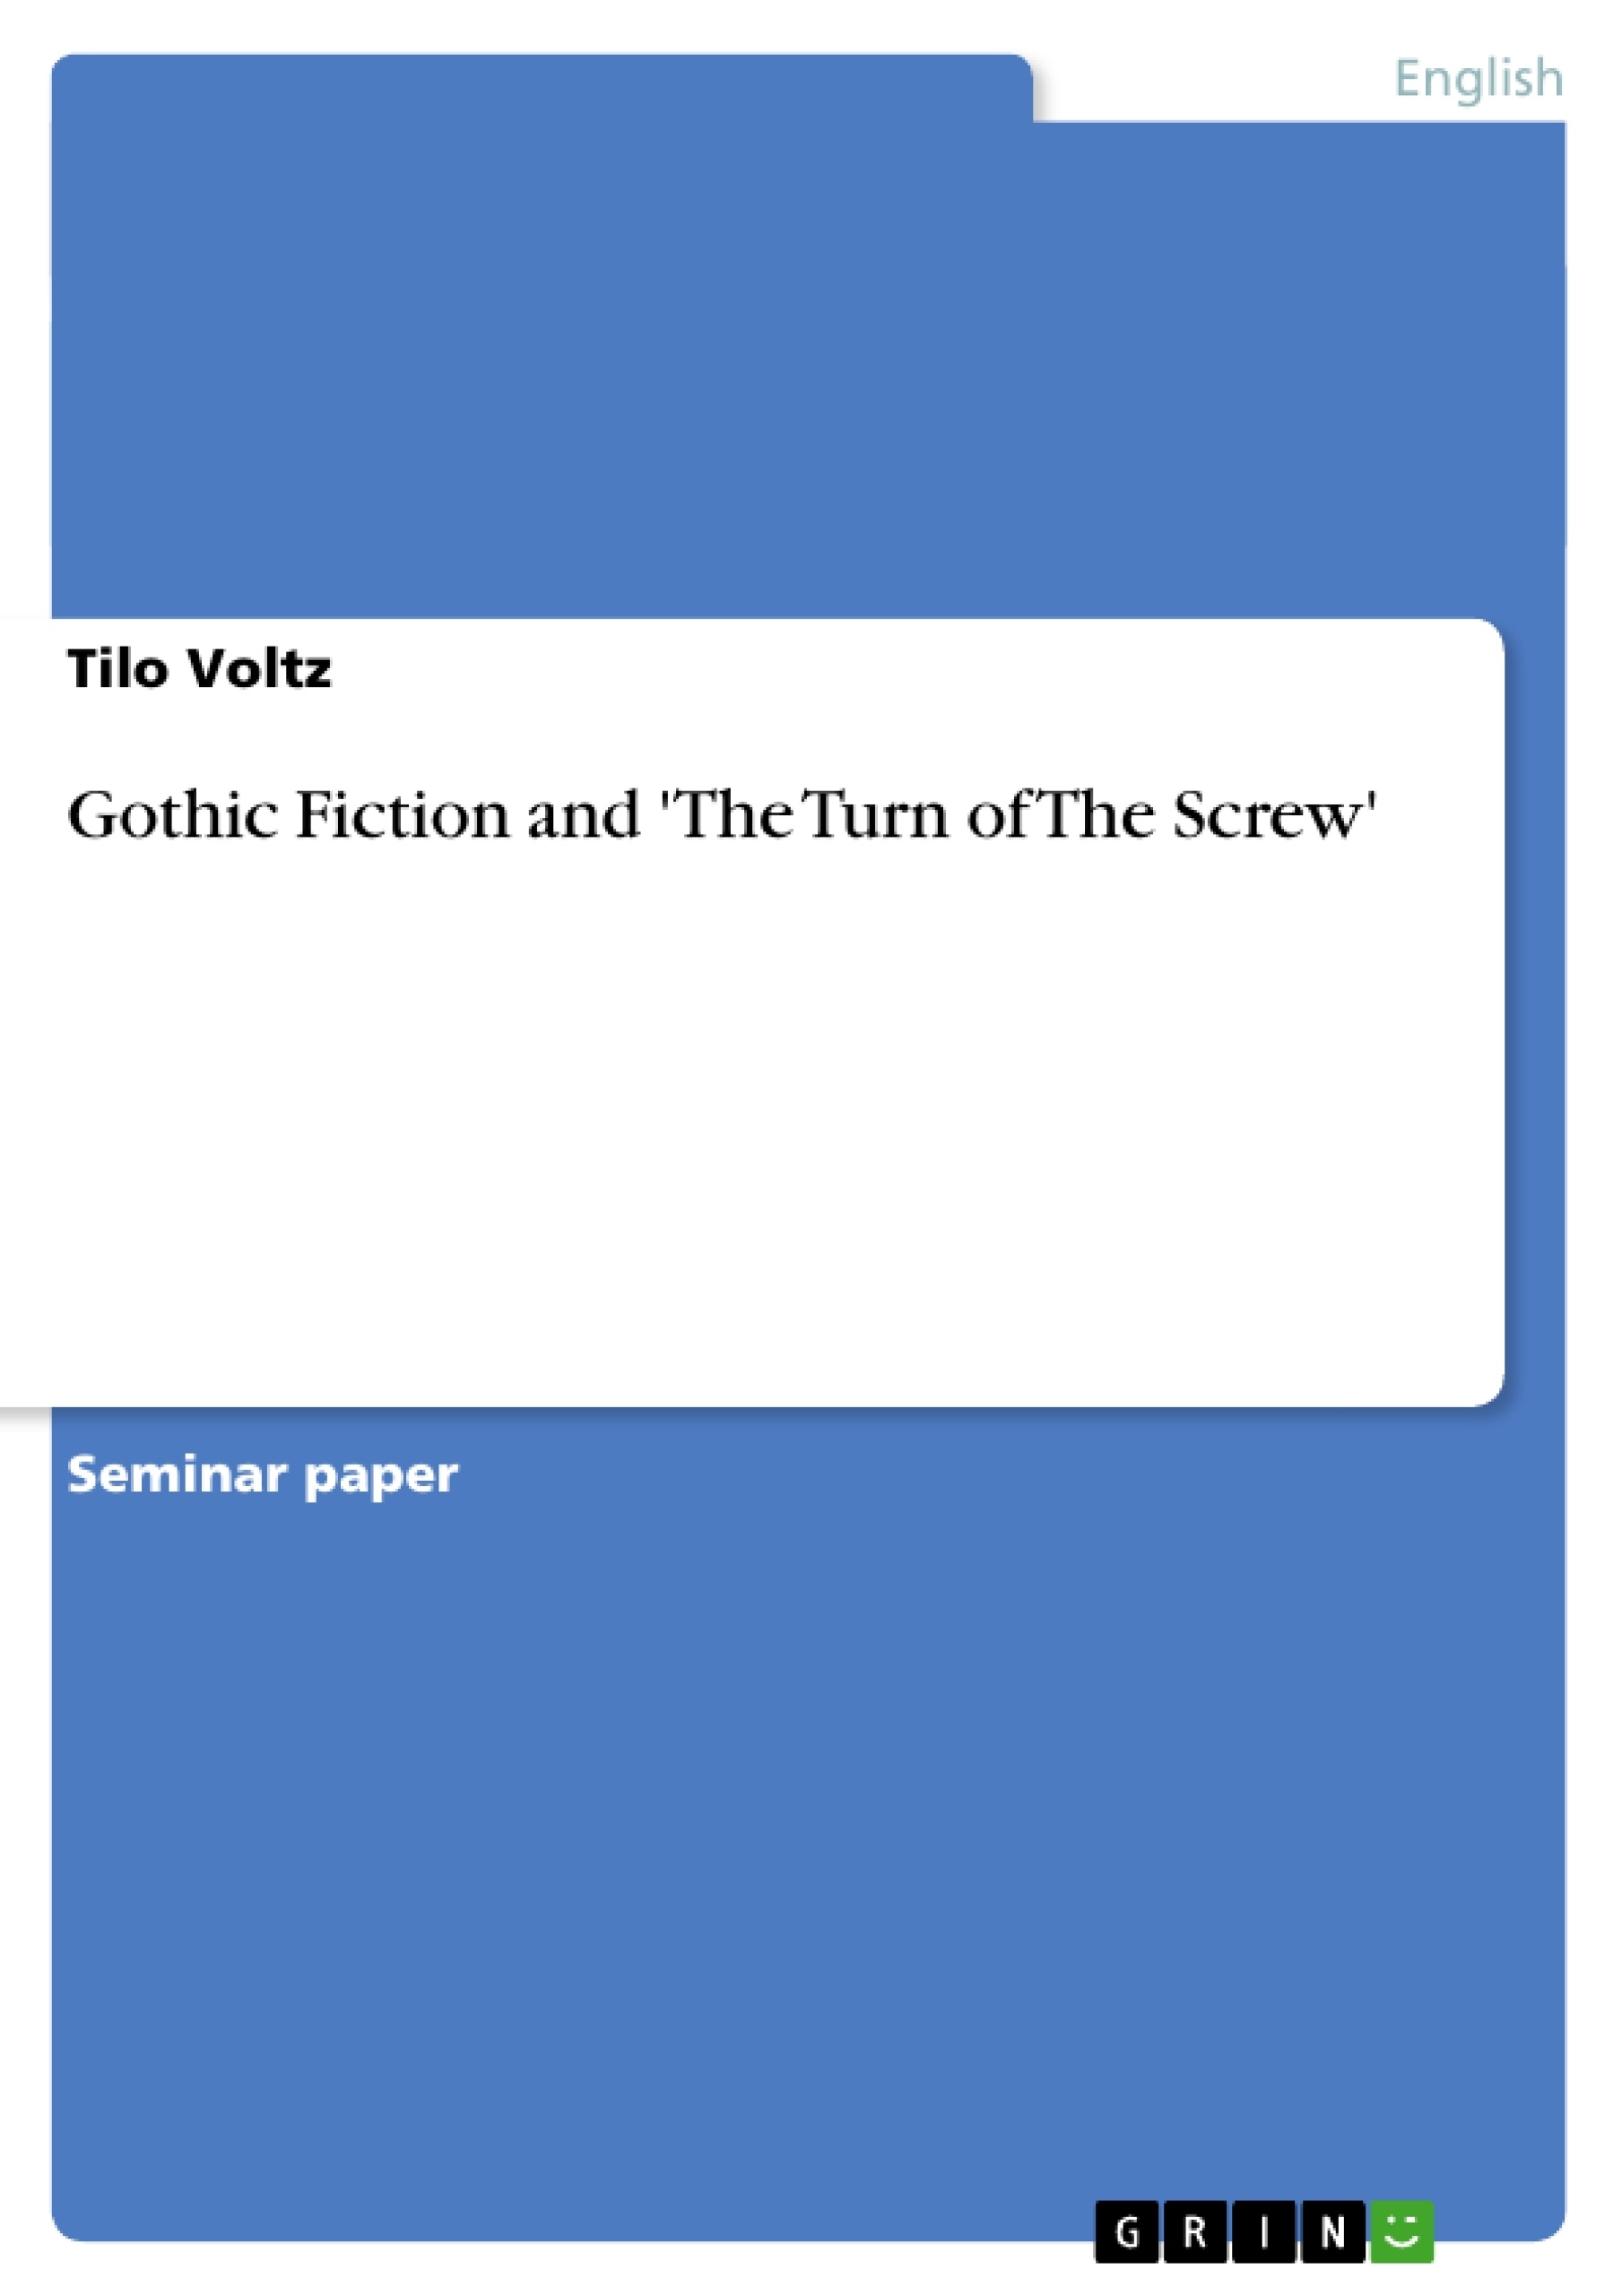 Titre: Gothic Fiction and 'The Turn of The Screw'